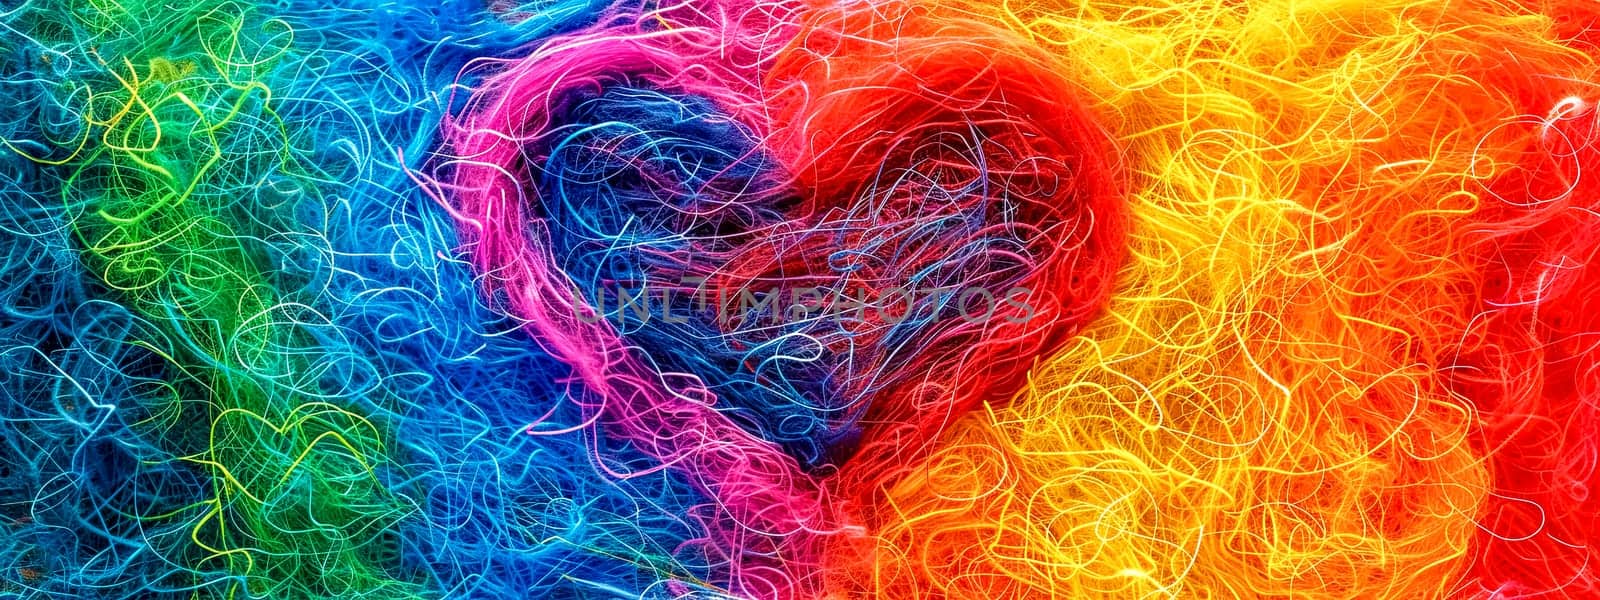 A close up of a rainbow colored yarn with a heart in the middle by Edophoto